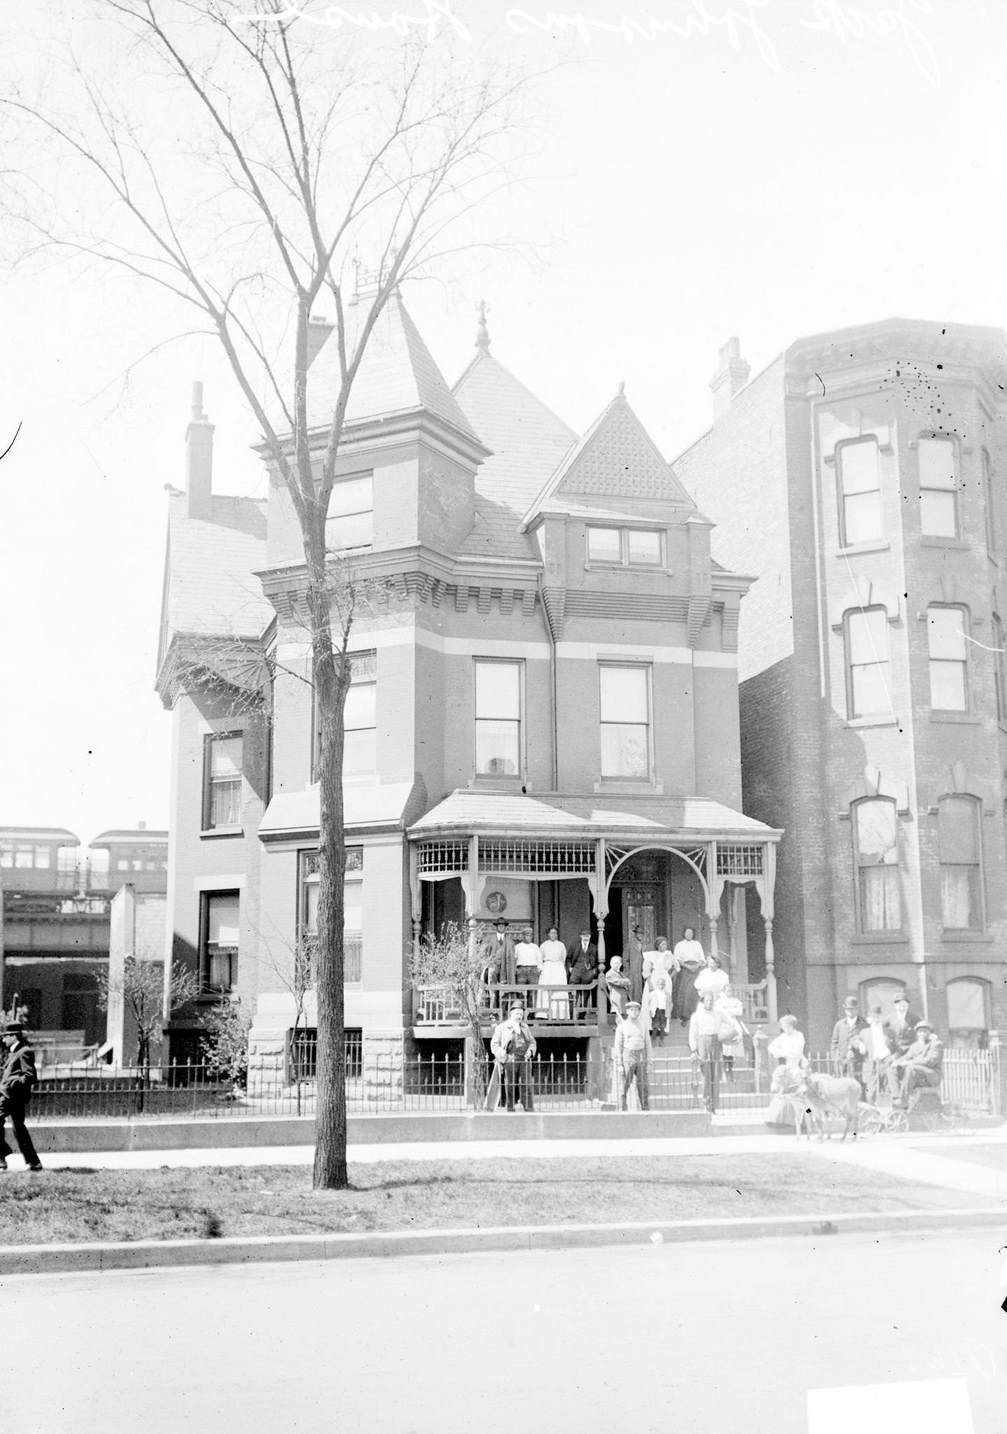 The home of Jack Johnson in Chicago, IL, 1910. Many people are standing on the porch and in front of the building.